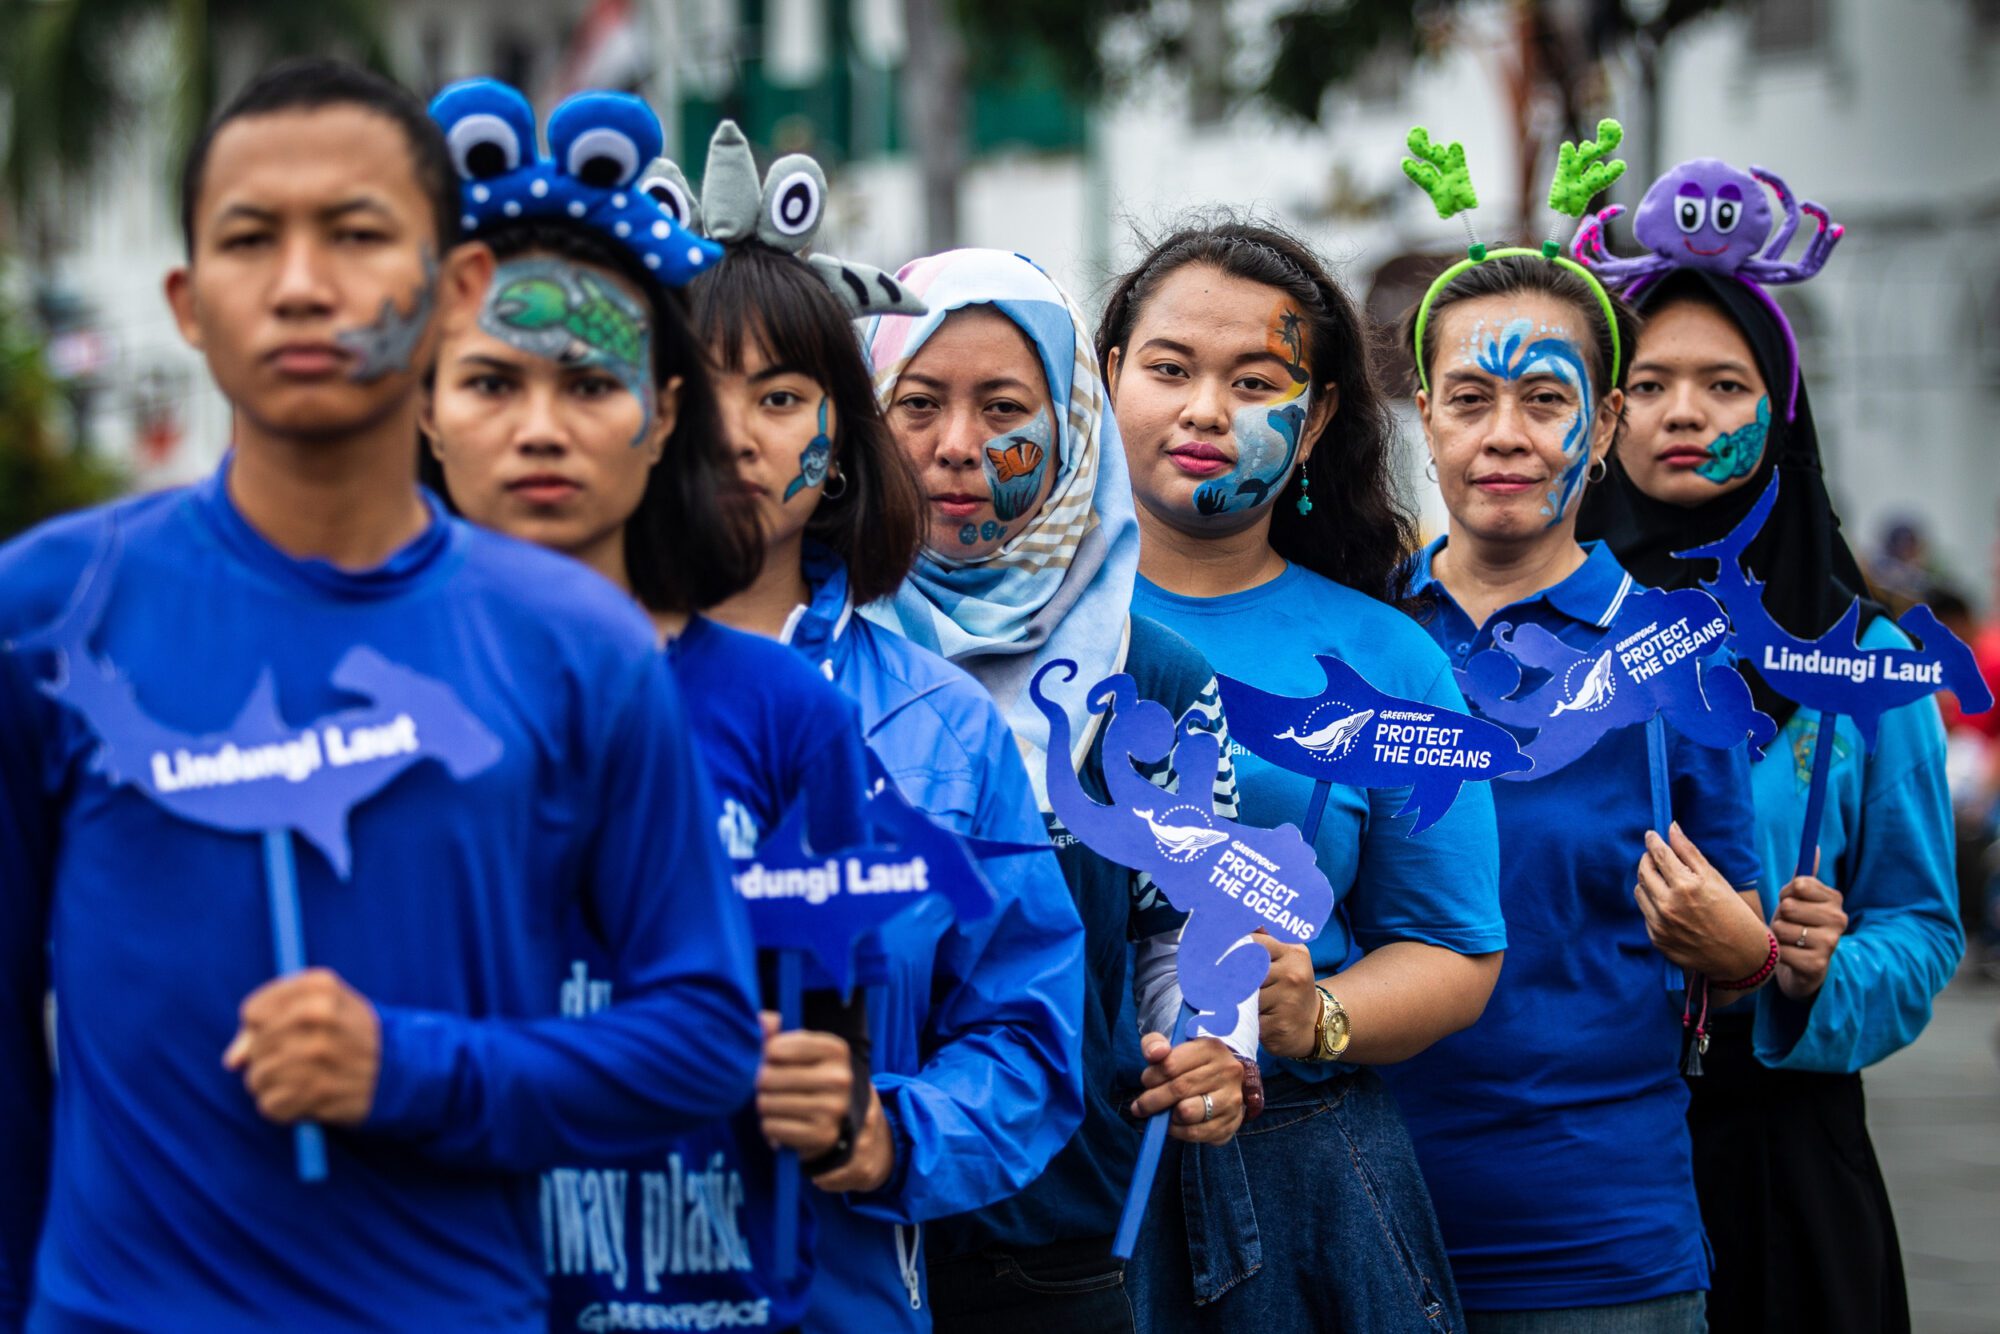 A row of people in blue clothes and ocean themed face paint at a campaign event.